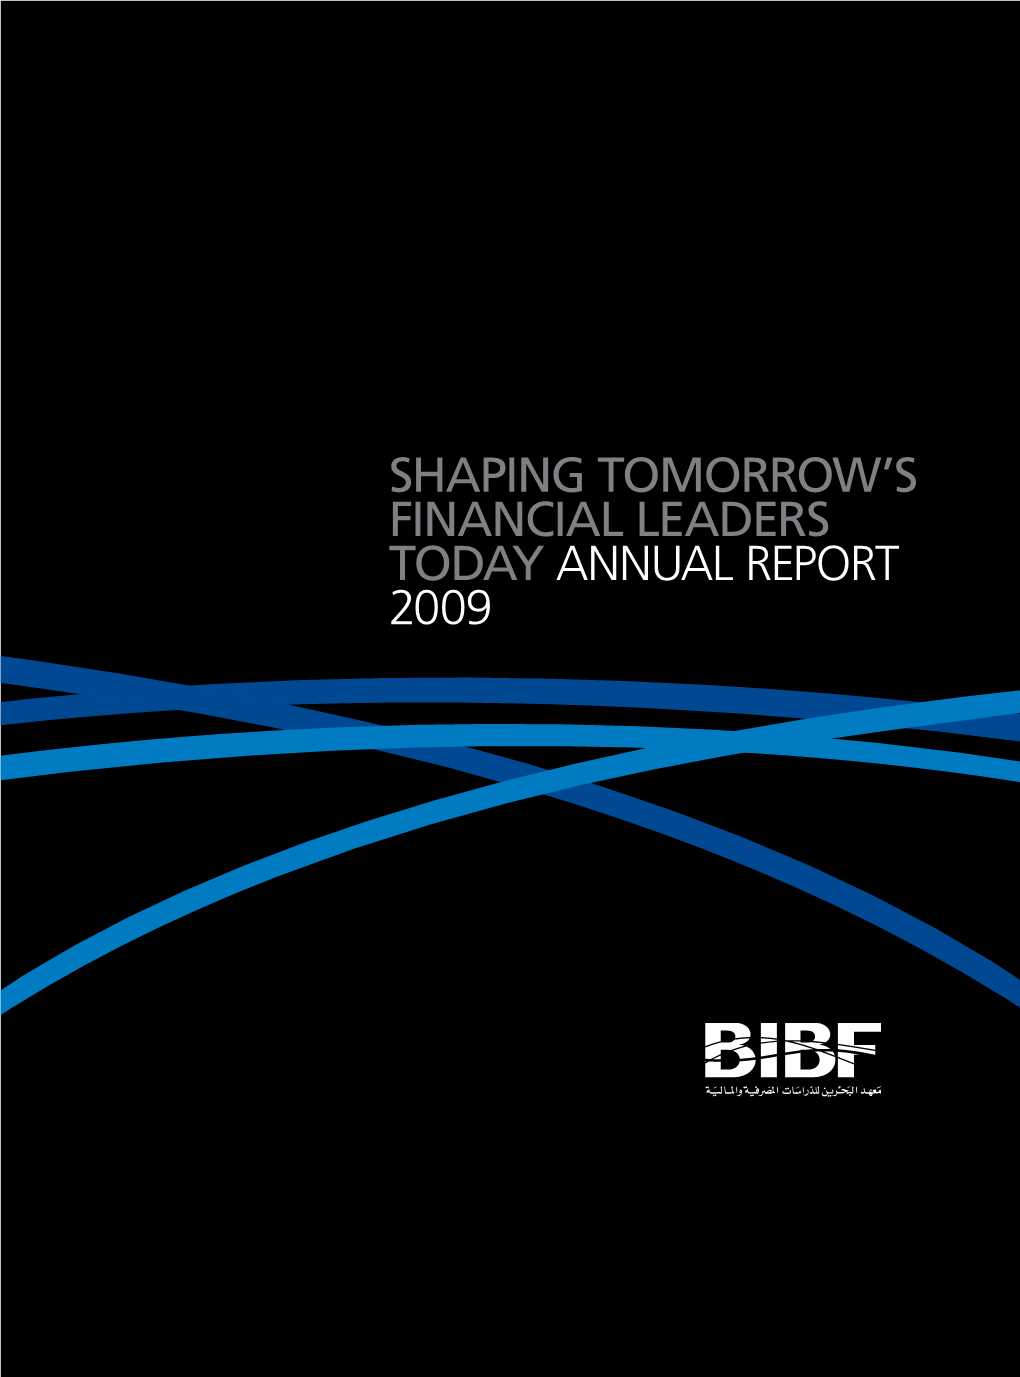 Shaping Tomorrow's Financial Leaders Today Annual Report 2009